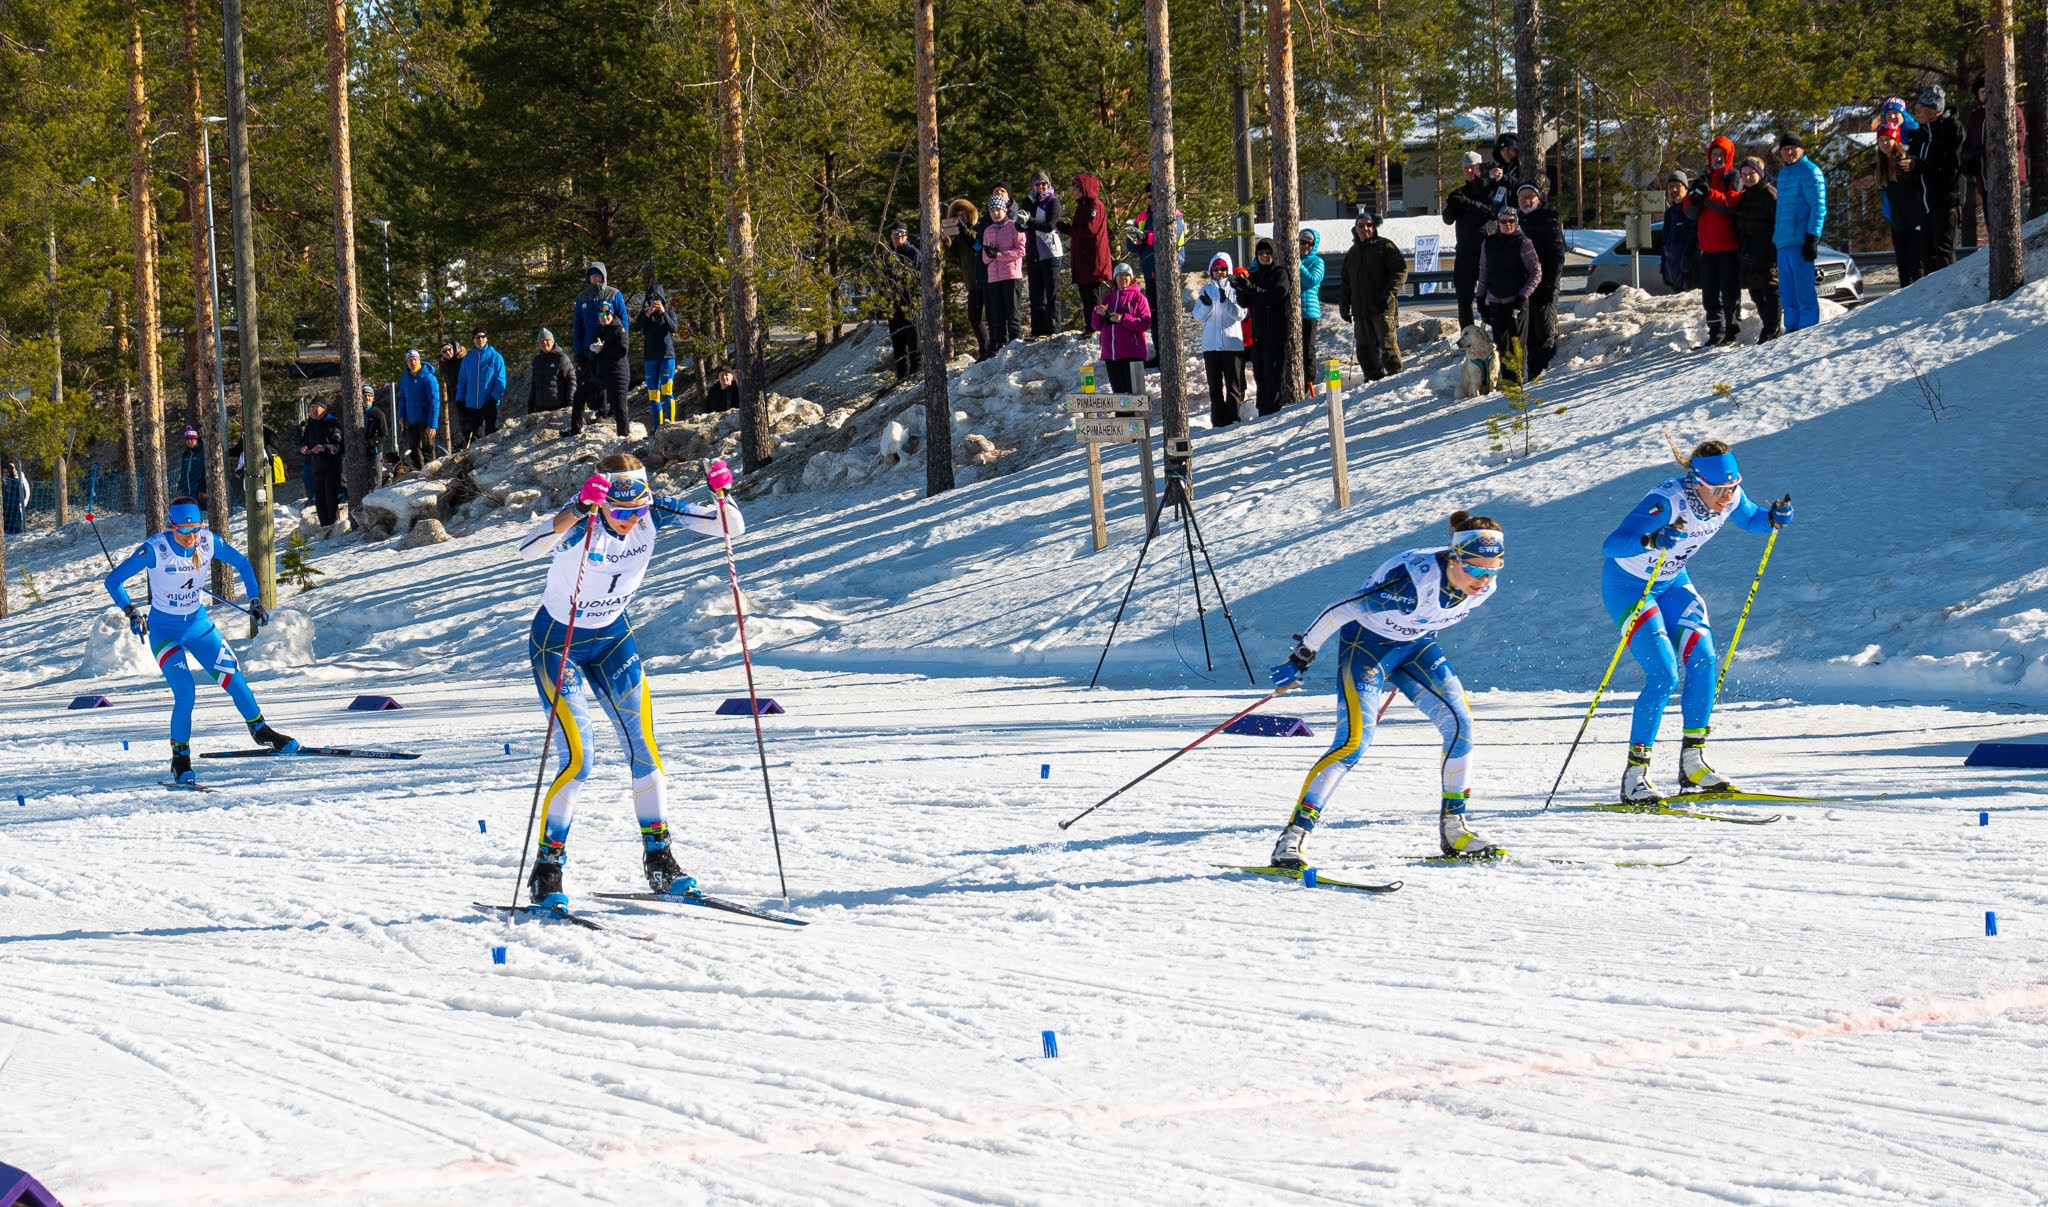 Ericsson adds to cross-country skiing silver with sprint success at Winter EYOF